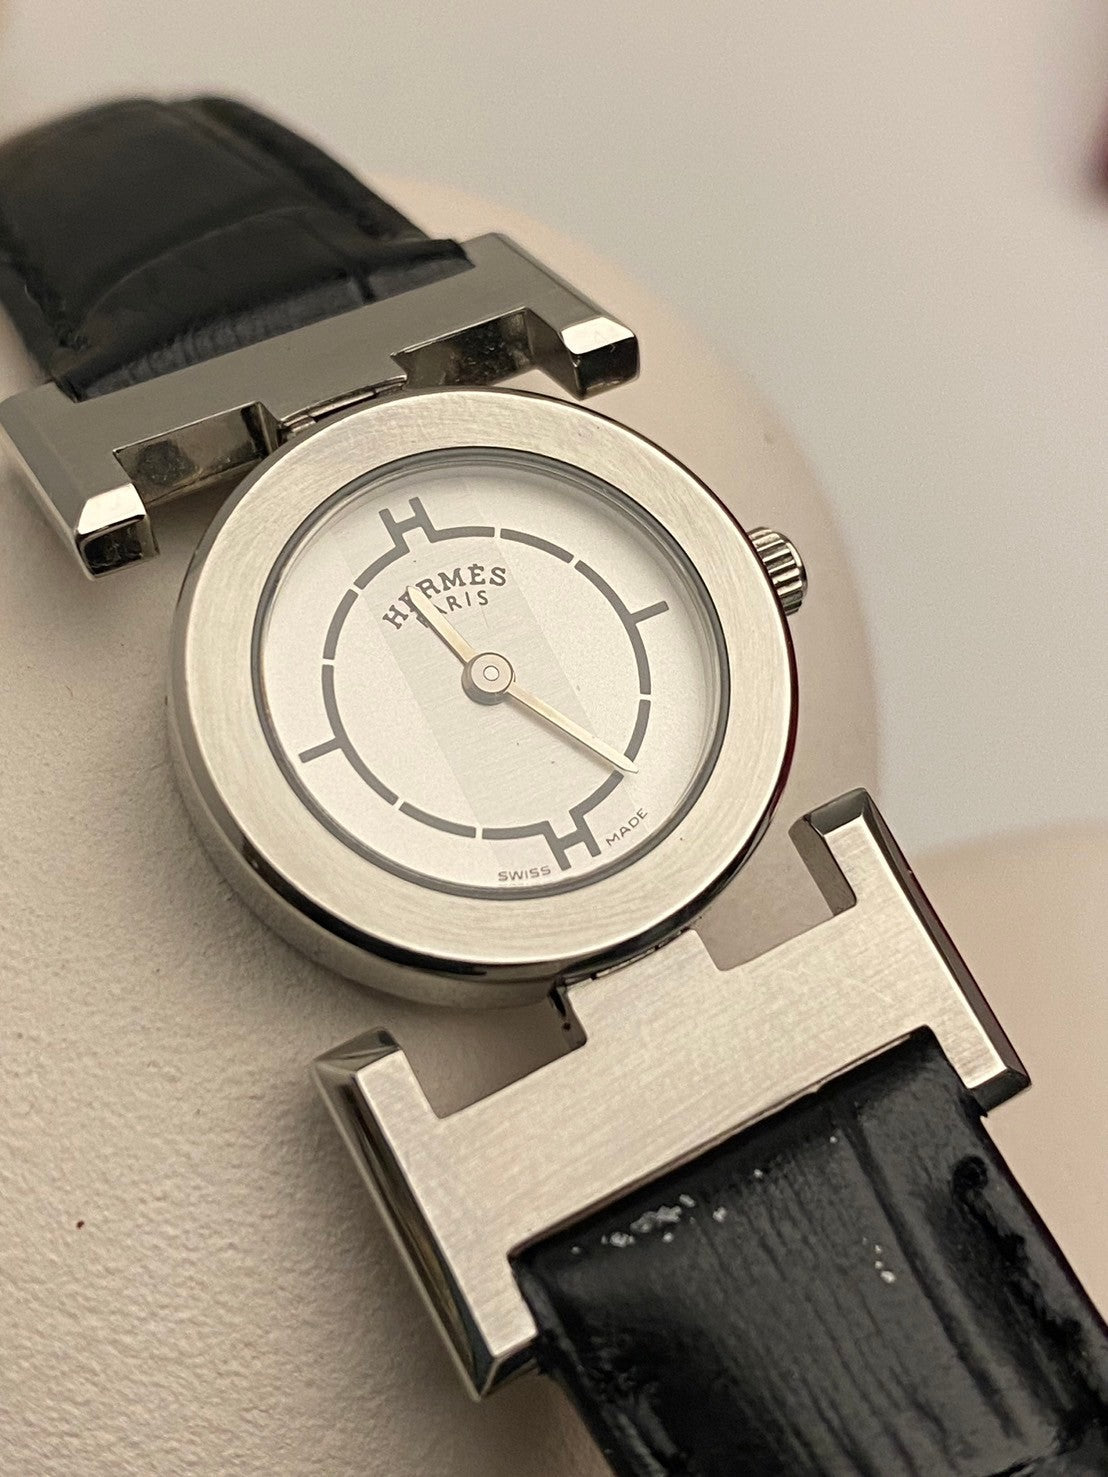 Hermes white dial leather strap